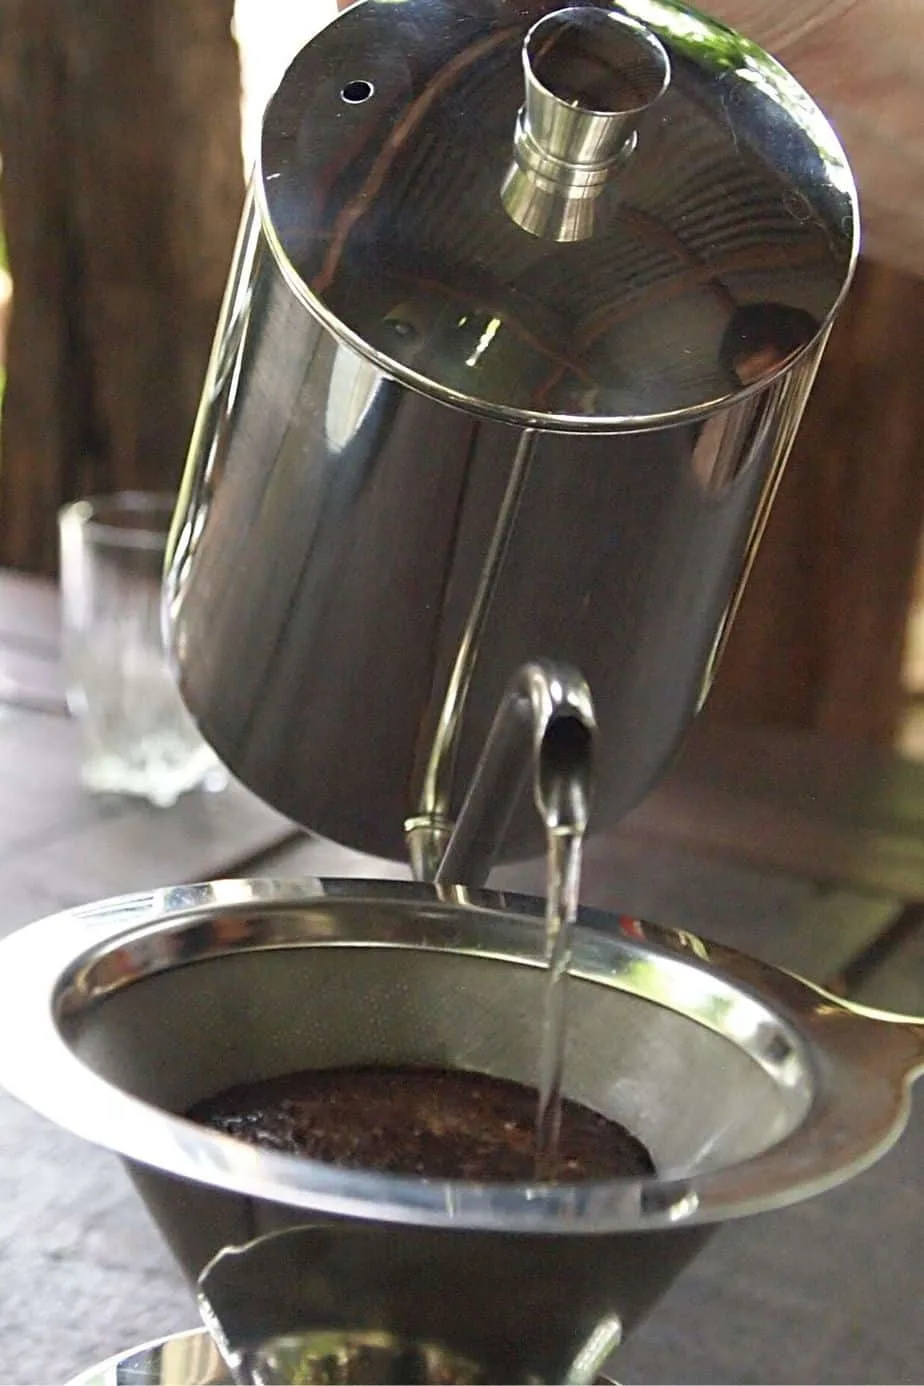 If you want to use the liquid form of the coffee grounds, strain the coffee so only the liquid will be left